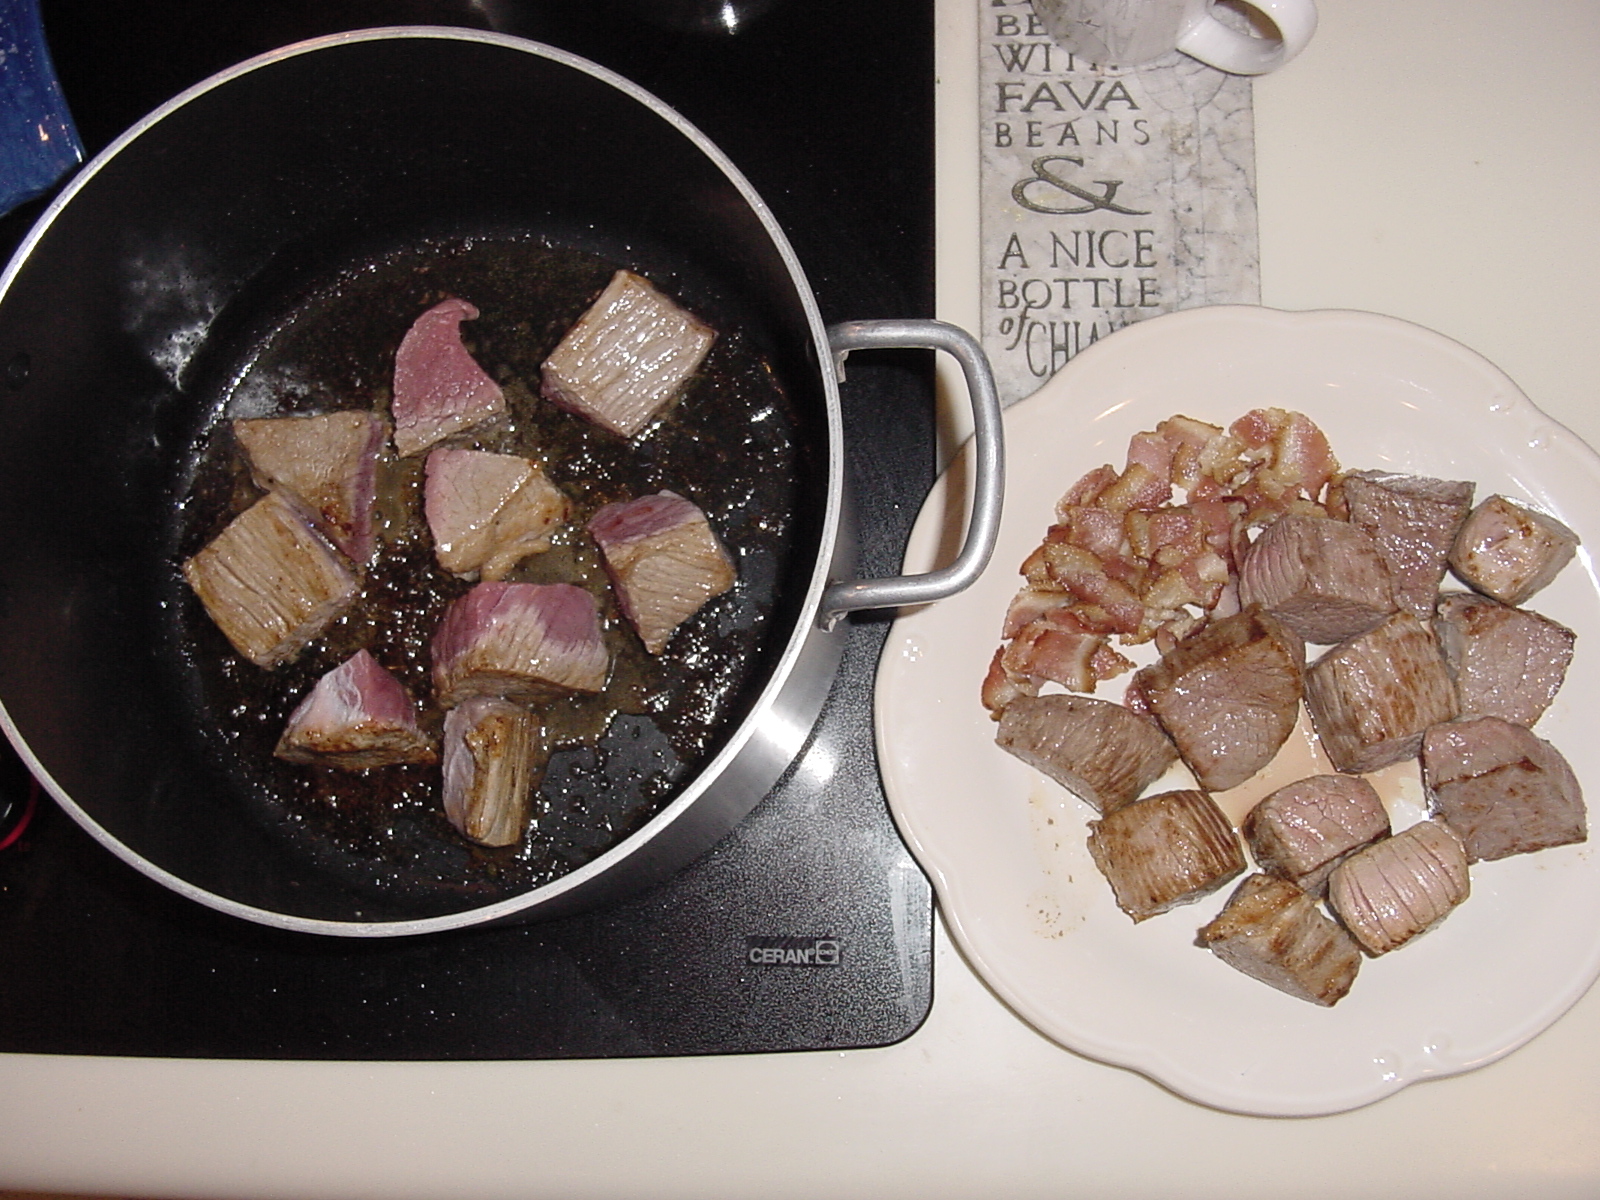 Sautéing the bacon and beef